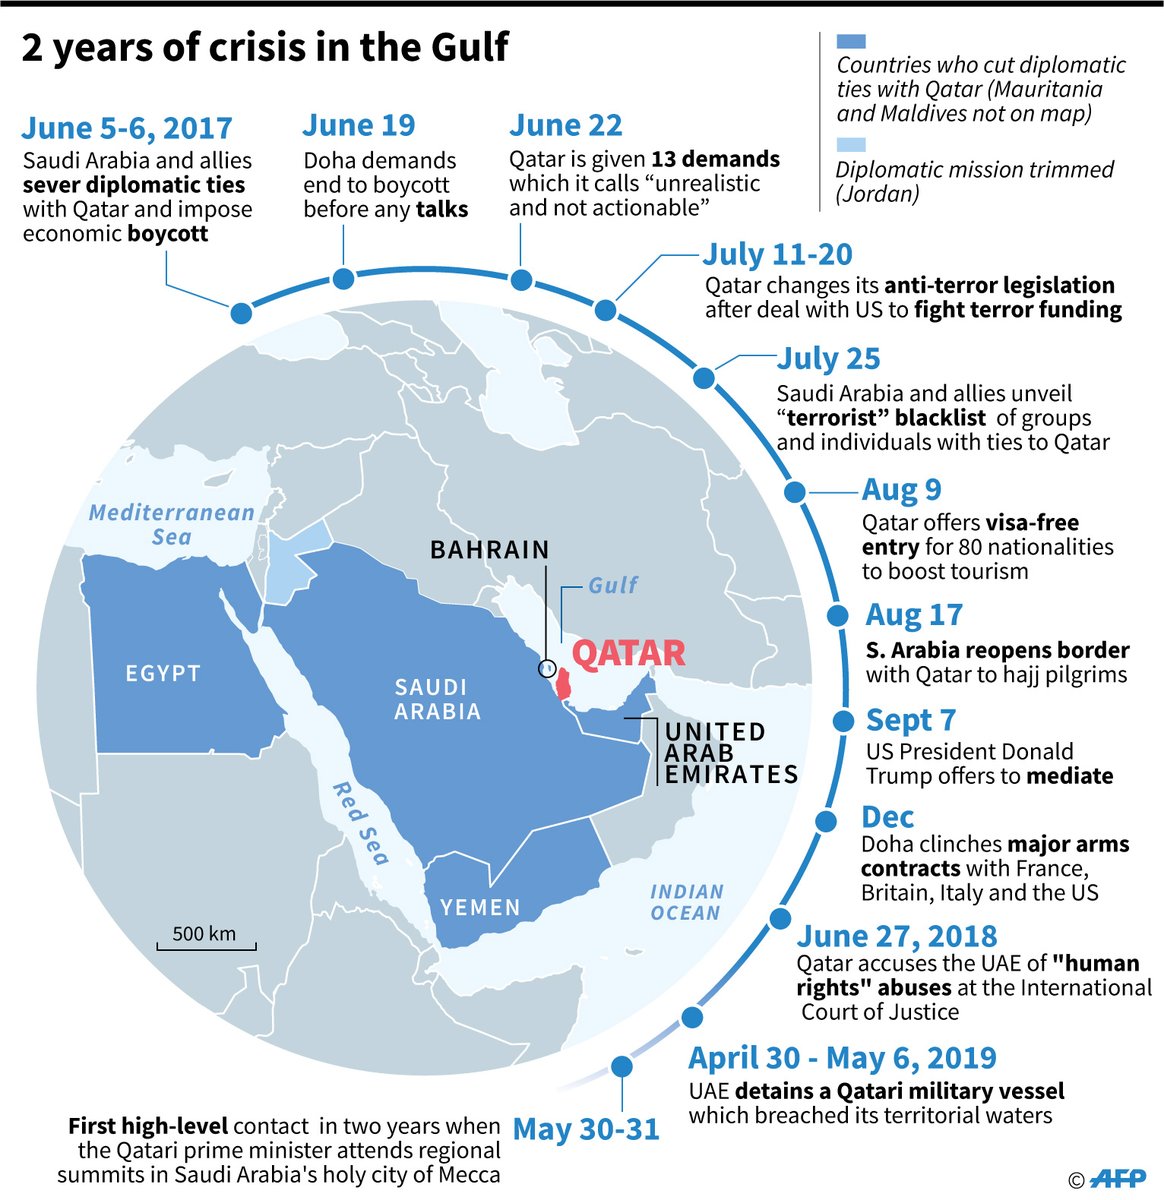 As with the influence operations highlighted in "Blood Money", Qatar's efforts to cozy up to Washington via defense partnerships and materiel purchases is an attempt to keep US support as the rest of the Gulf Cooperation Council (GCC) maintains its embargo on Qatar.17/